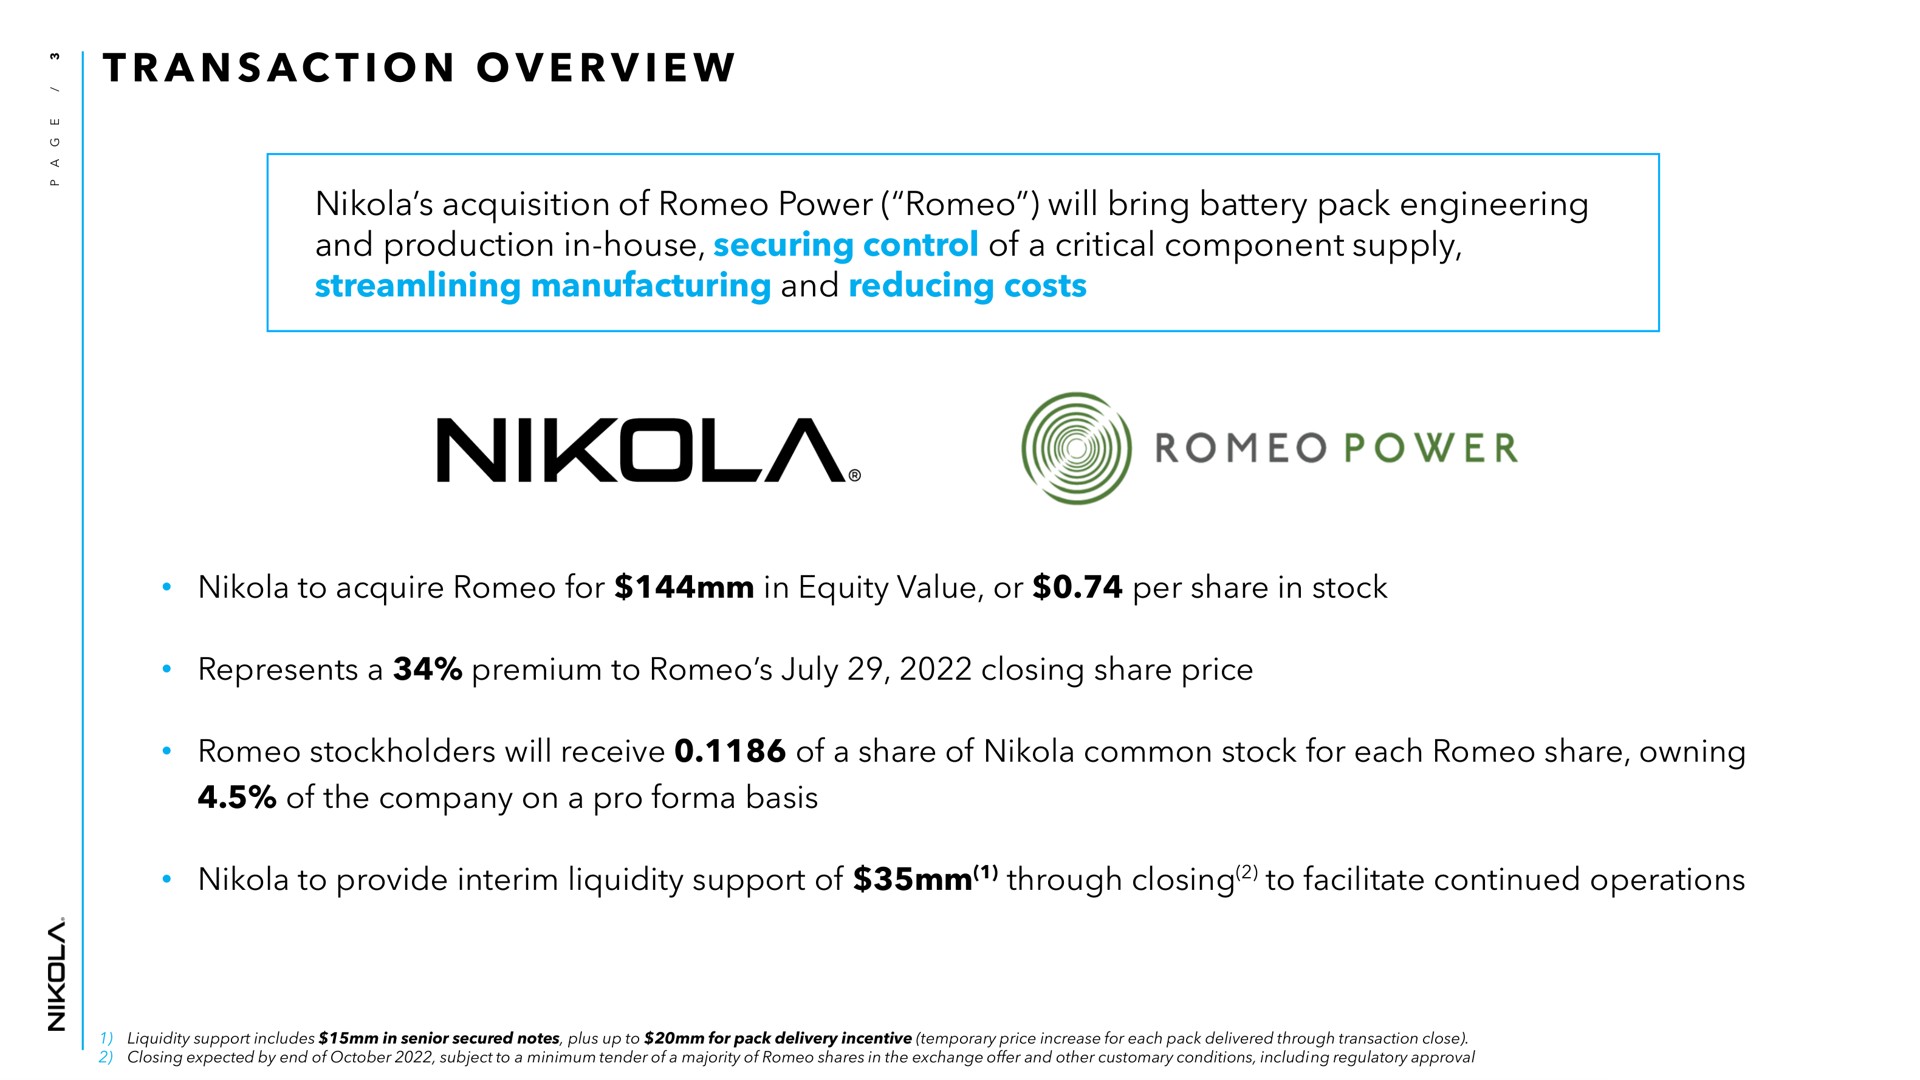 a a i i acquisition of power will bring battery pack engineering and production in house securing control of a critical component supply streamlining manufacturing and reducing costs to acquire for in equity value or per share in stock represents a premium to closing share price stockholders will receive of a share of common stock for each share owning of the company on a pro basis to provide interim liquidity support of through closing to facilitate continued operations transaction overview | Nikola